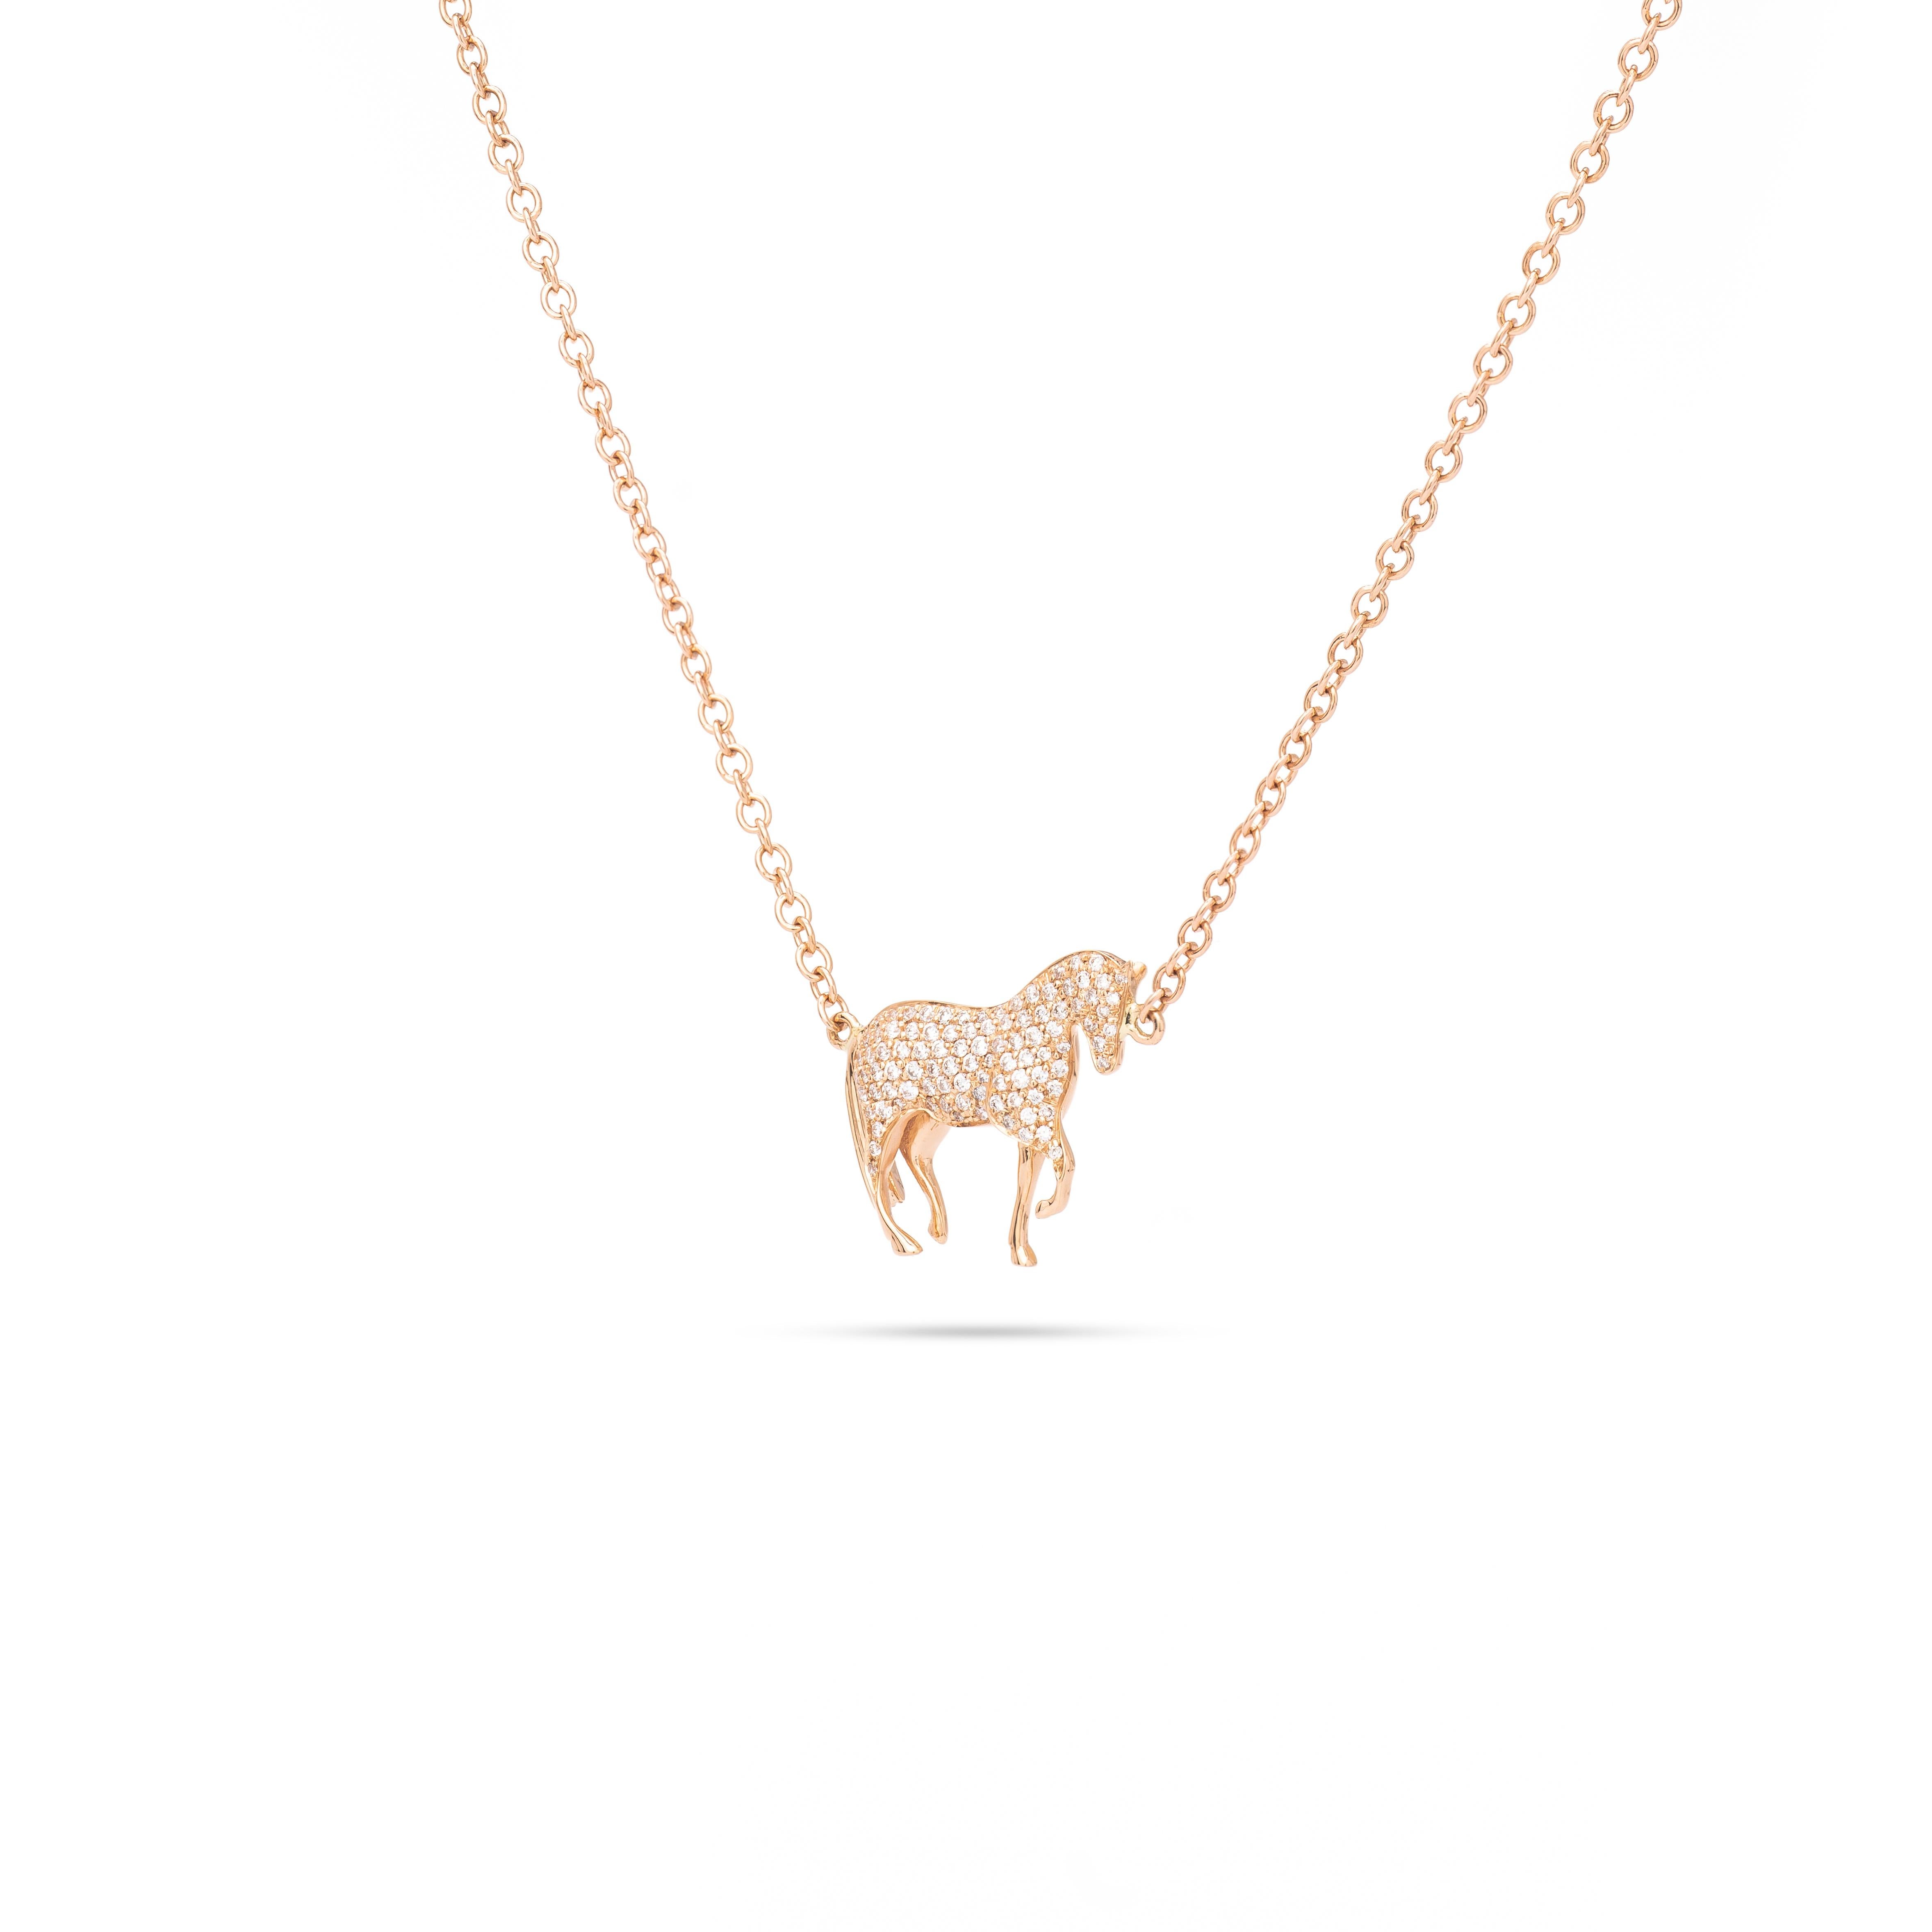 Splendid 18kt gold pendant necklace available for sale. This artisanal piece, handmade in Italy, is part of an exclusive collection inspired by the equestrian world. The necklace features an elegant horseshoe-shaped pendant, symbolizing luck and